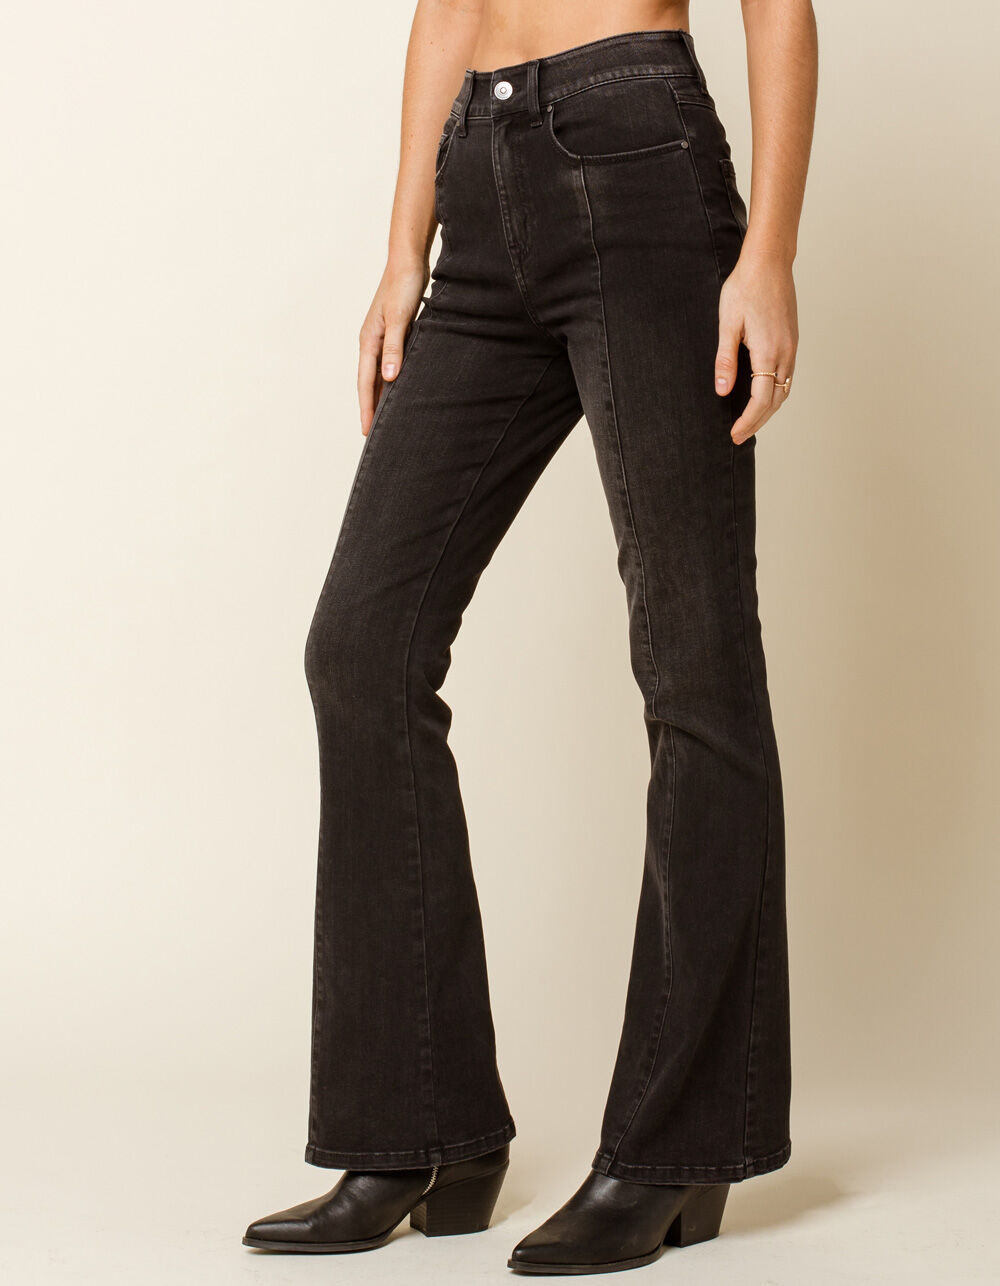 WEST OF MELROSE Say You'll Be Flare Seam Womens Jeans - BLACK | Tillys